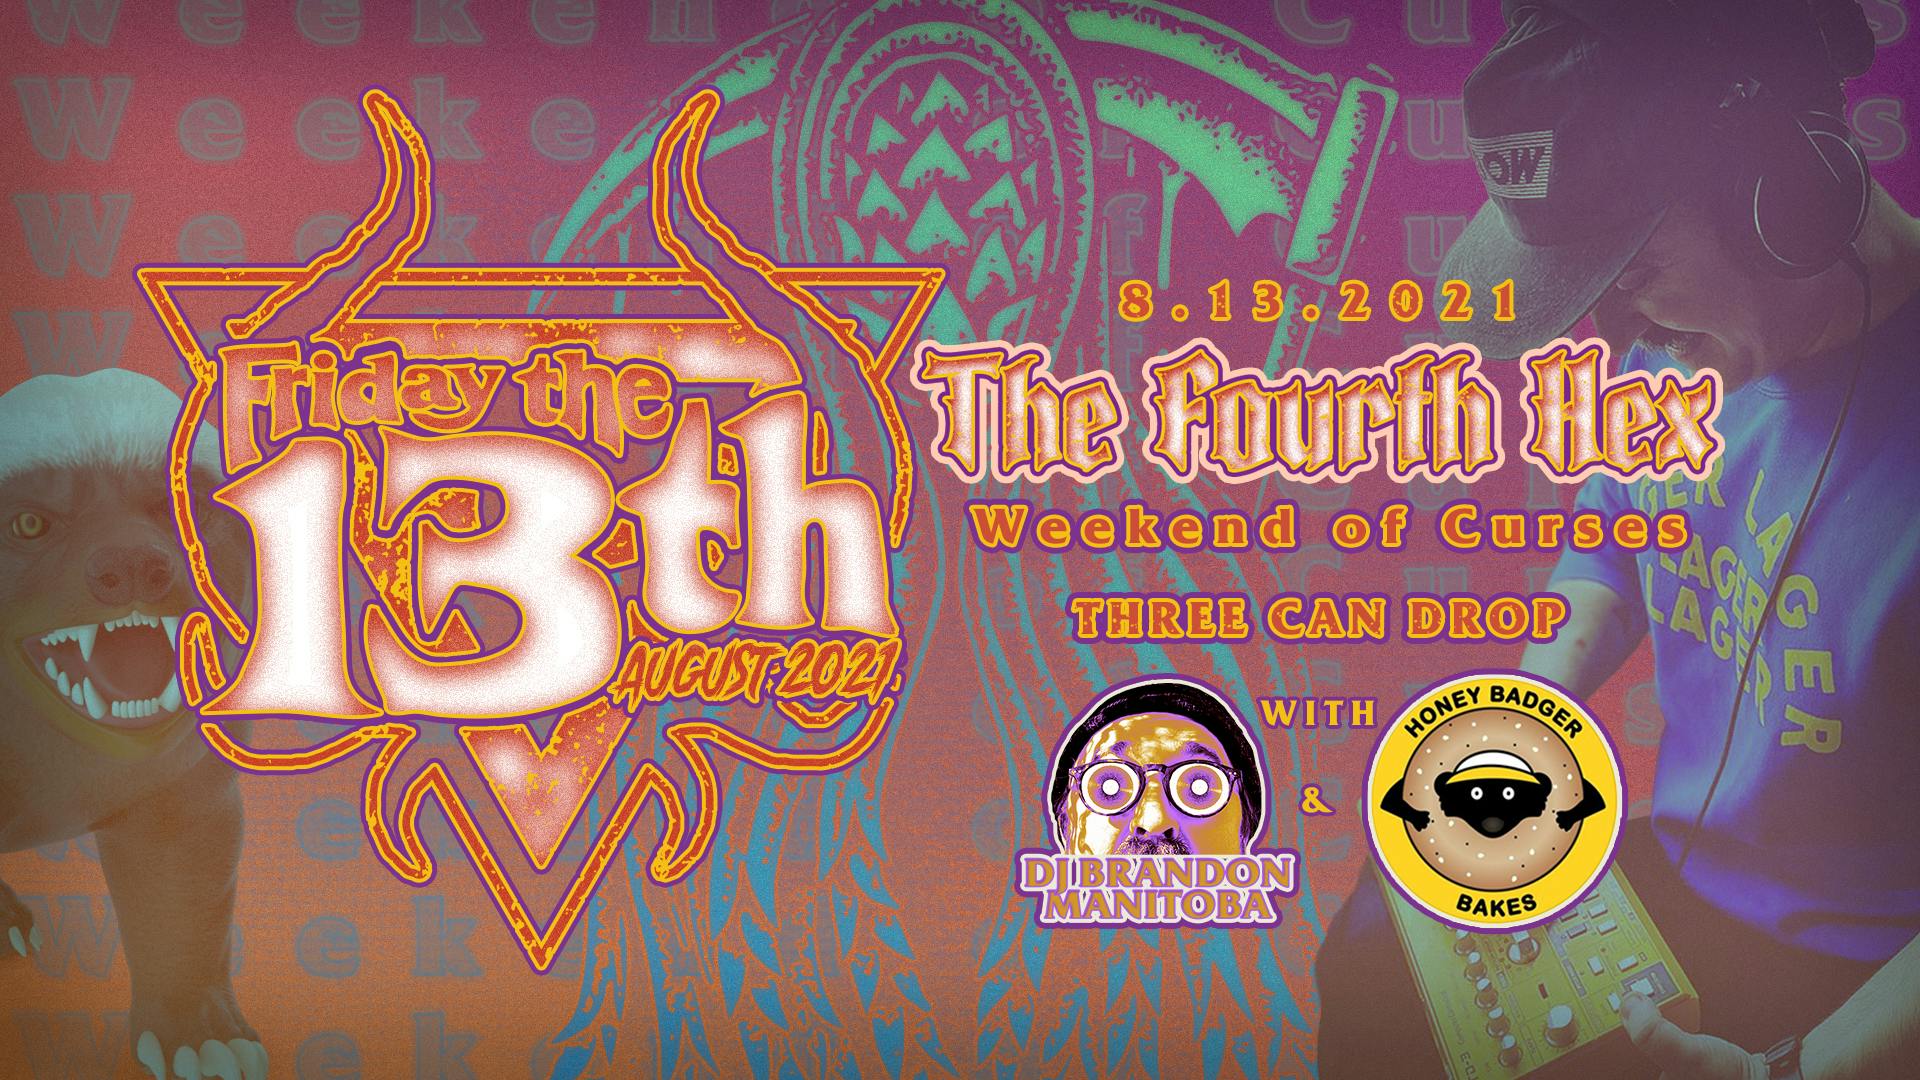 friday-13-fourth-hex-FB-event2